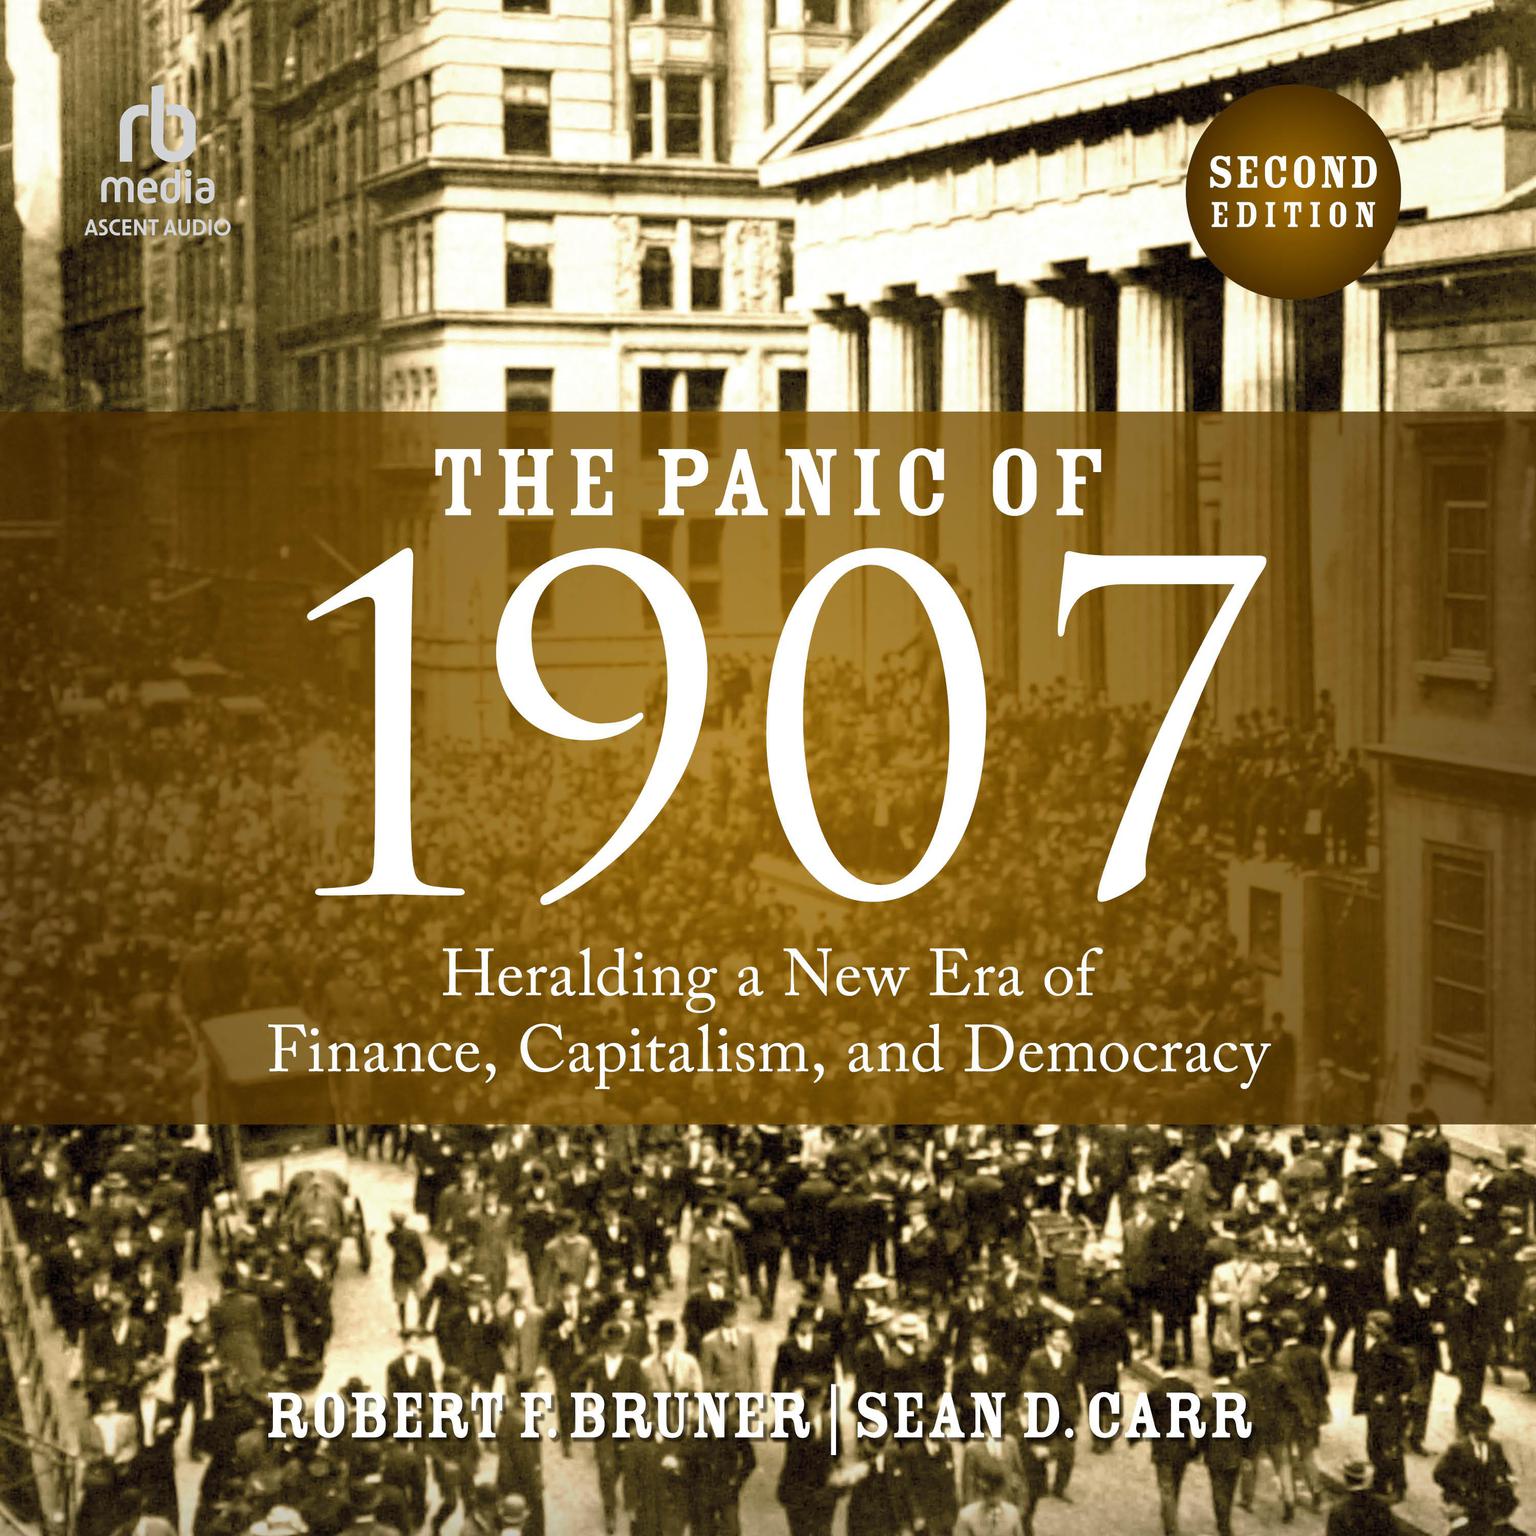 The Panic of 1907, 2nd Edition: Heralding a New Era of Finance, Capitalism, and Democracy Audiobook, by Robert F. Bruner